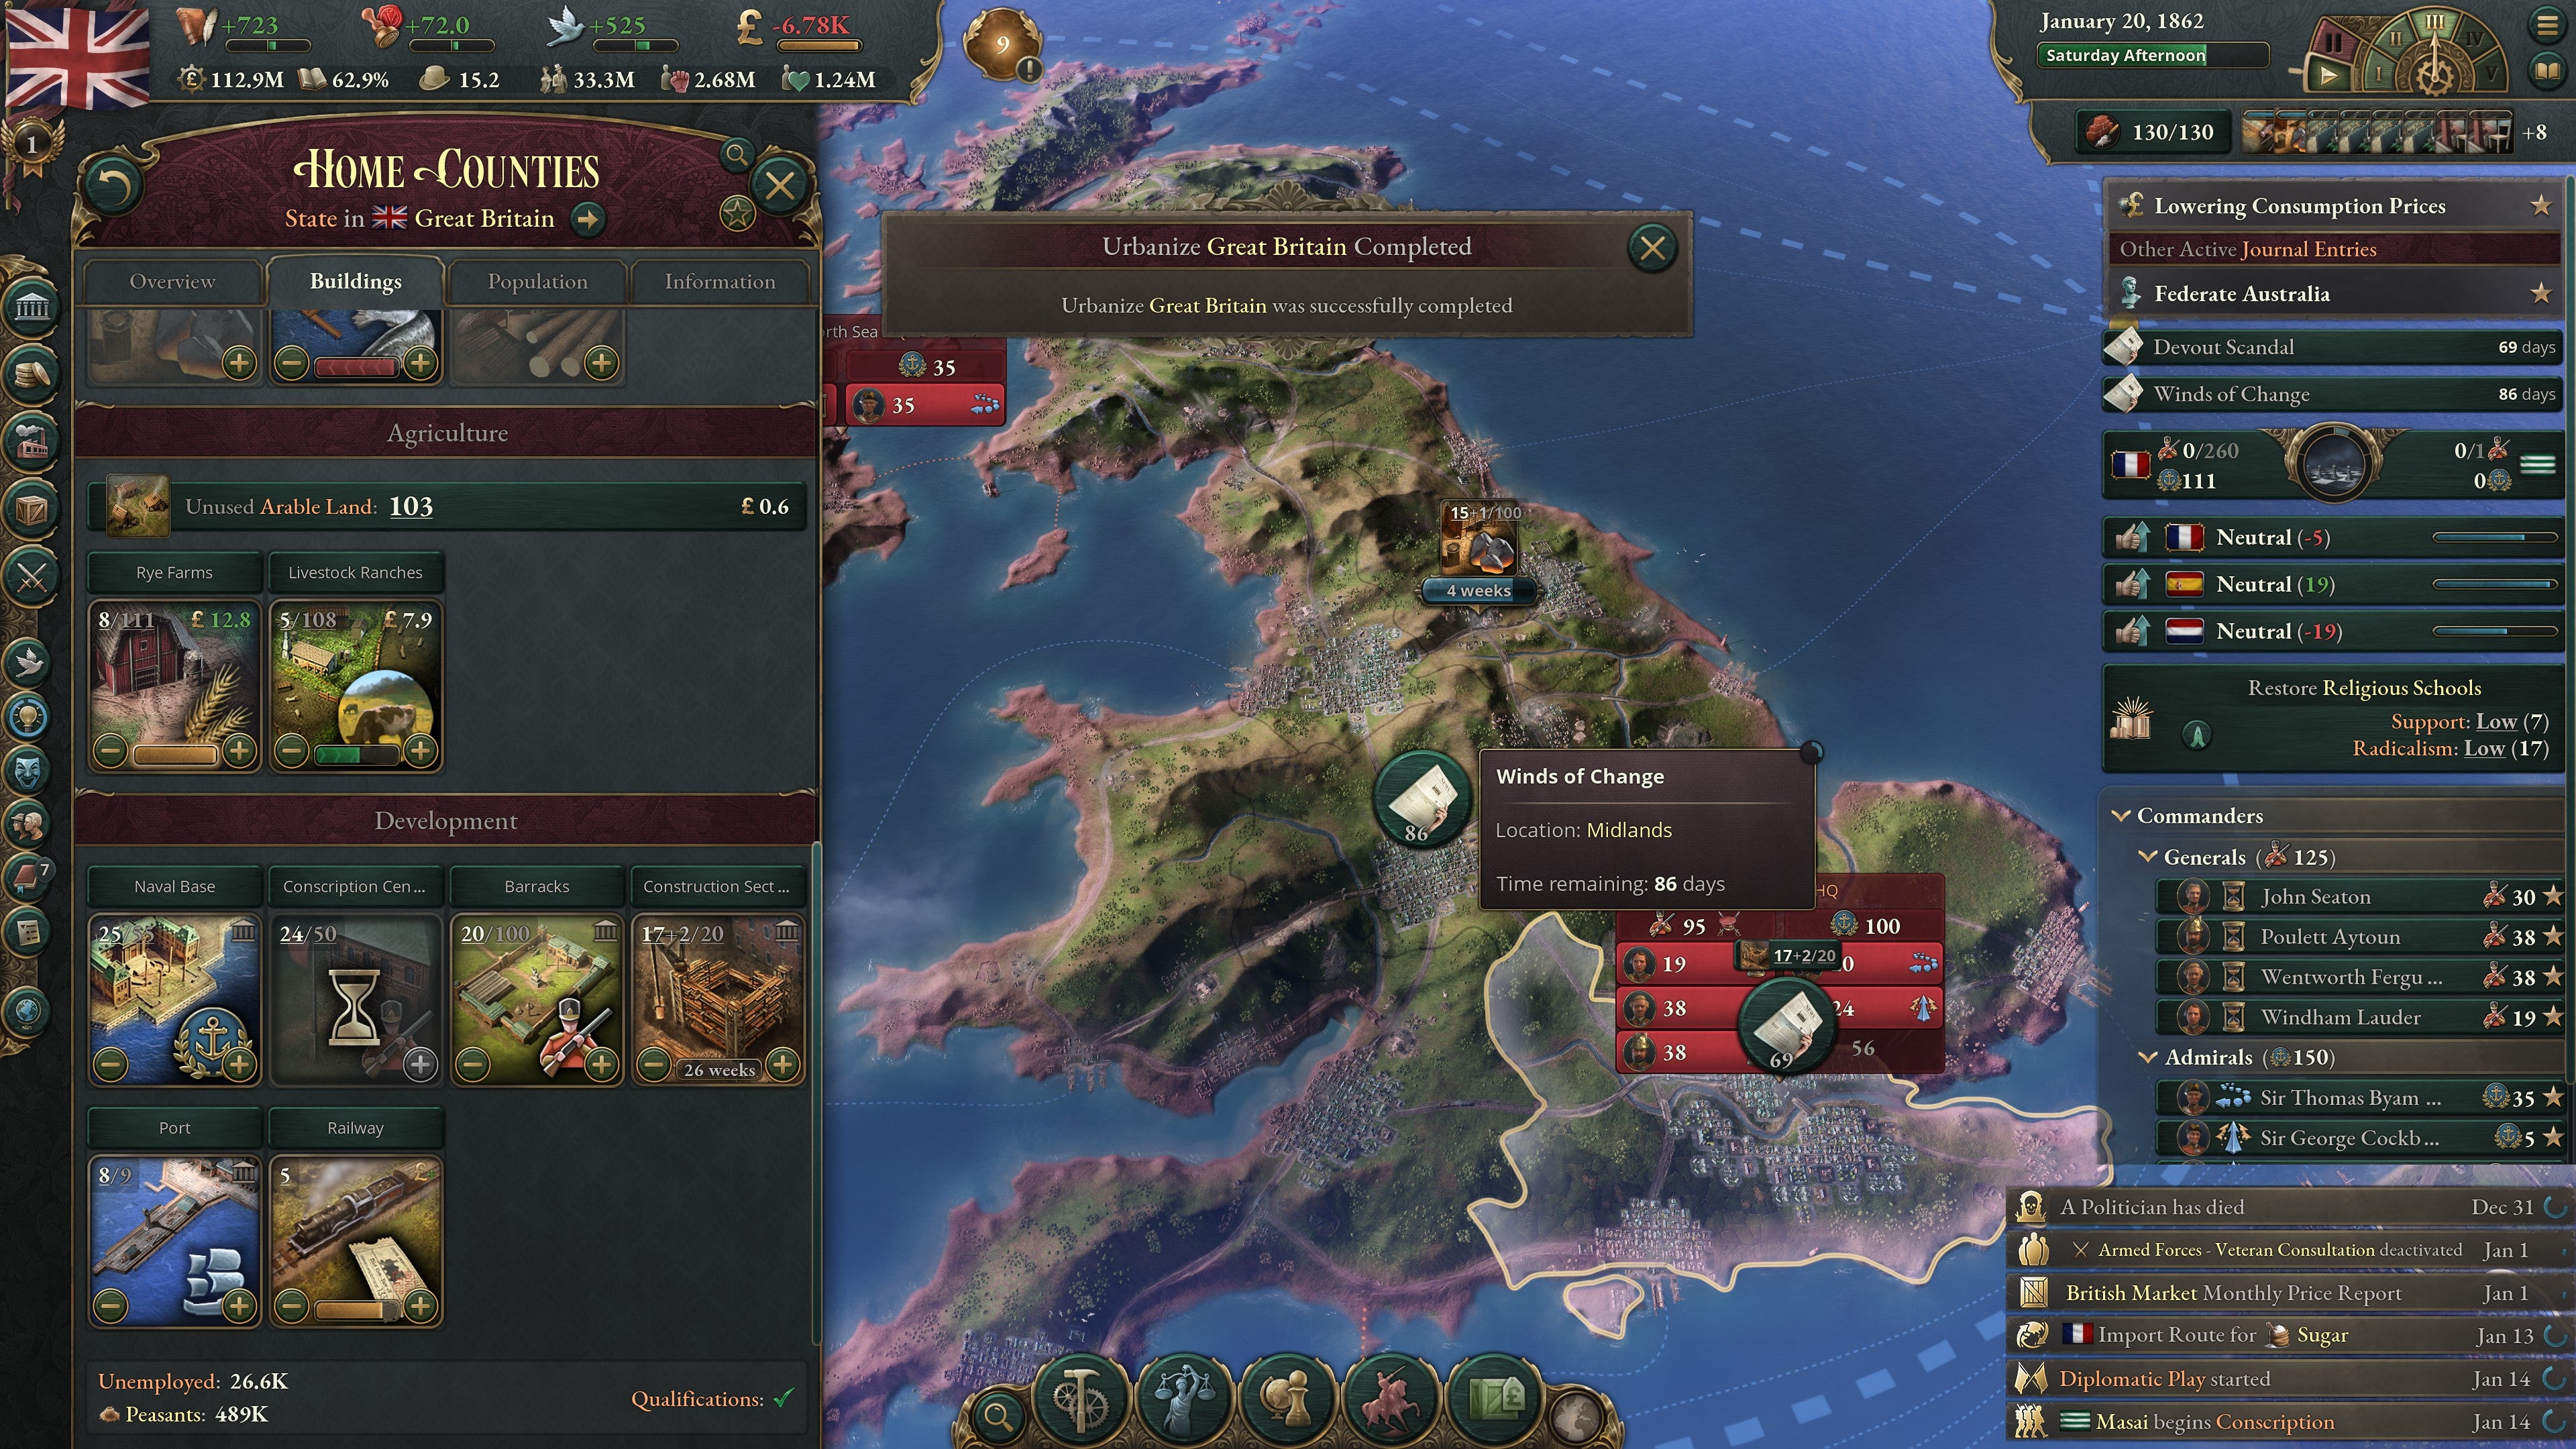 Victoria 3 review - A view of Britain, with UI on the left focusing on the Home Counties and your many options